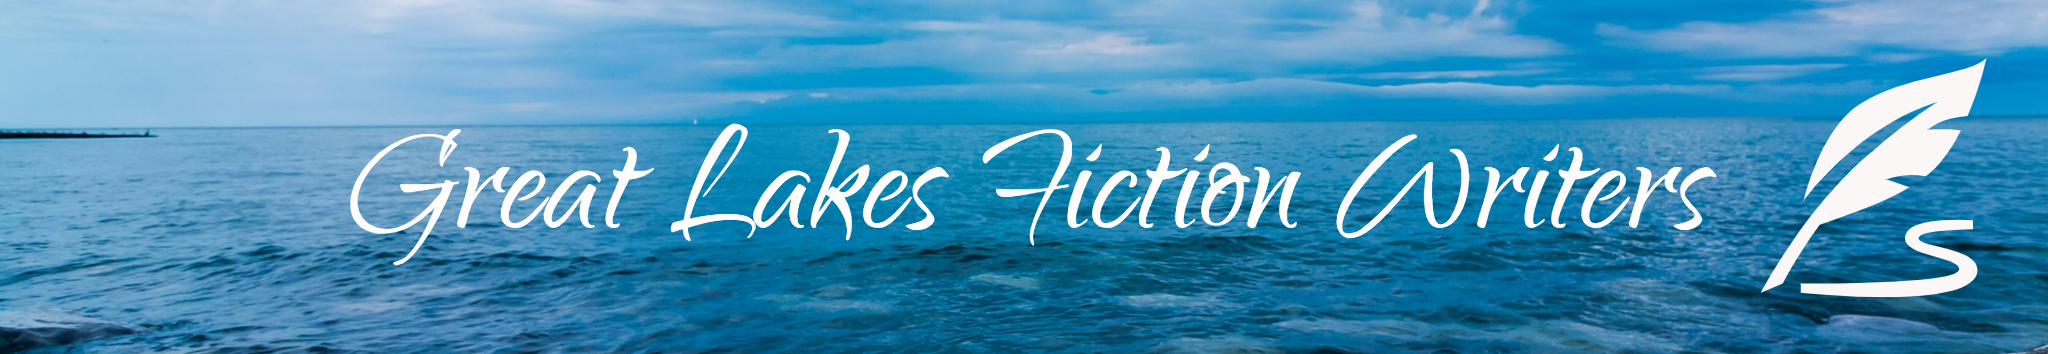 Great Lakes Fiction Writers